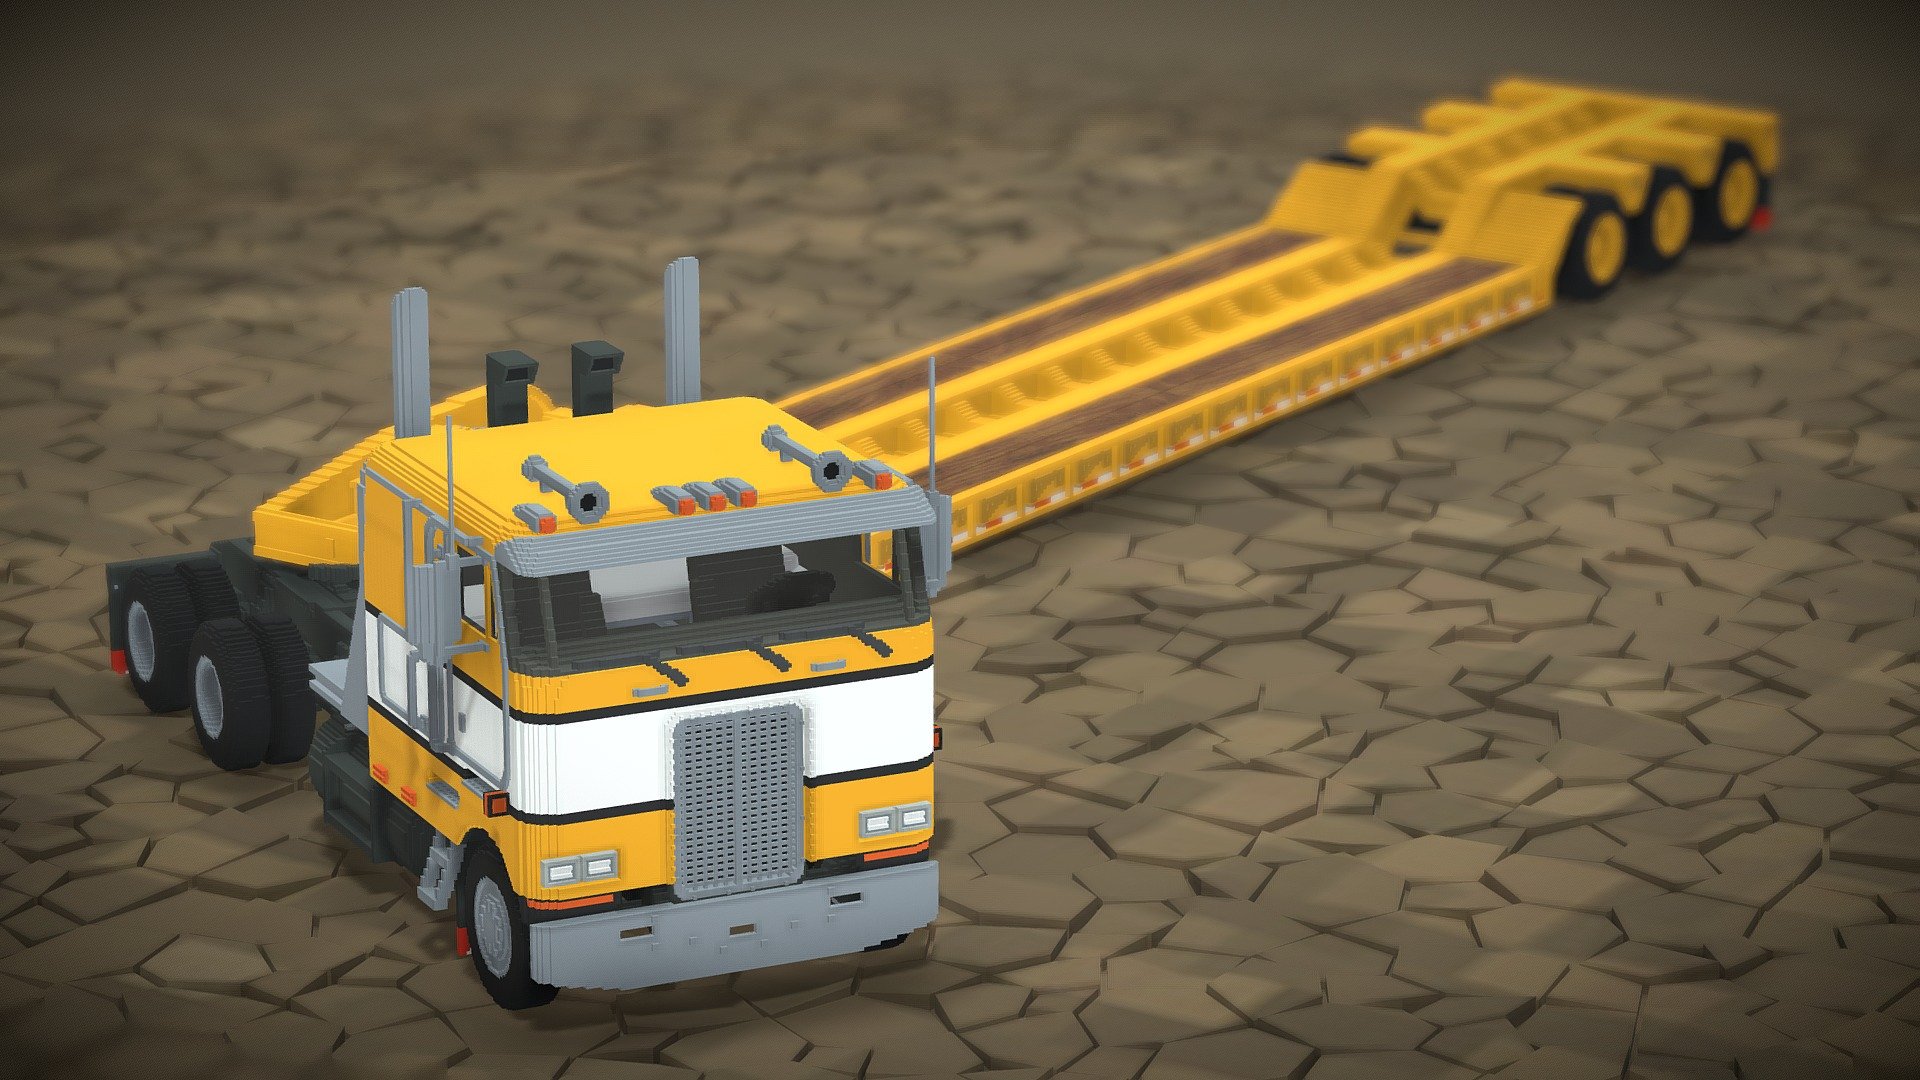 Voxel Peterbilt 362 Truck and Lowboy Trailer high details 3D models created by Shubbak3D in MagicaVoxel Editor.



Voxel Peterbilt 362 Truck model composed of 4 parts:

Part 1 – Front of the truck (Voxel Size = 158 x 204 x 174)

Part 2 – Back of the truck (Voxel Size = 118 x 168 x 54)

Part 4 – Front Wheels x2  (Voxel Size = 14 x 45 x 45)

Part 5 – Back Wheels x4 (Voxel Size = 27 x 45 x 45)



Voxel Lowboy Trailer model composed of 4 parts:

Part 1 – Part1 (Voxel Size = 129 x 207 x 48)

Part 2 – Part2  (Voxel Size = 125 x 240 x 17)

Part 3 – Part3  (Voxel Size = 125 x 240 x 17)

Part 4 – Part4  (Voxel Size = 127 x 172 x 73)

Part 5 – Wheels x6 (Voxel Size = 27 x 45 x 45)



All Formats Size: 86.6 MB

Zip File Size: 12.3 MB

(Polys Count: 340128) (Verts Count: 454277)

Available Formats: .vox (MagicaVoxel) .max (3ds max 2021 default) .qb .obj + mtl .fbx

Your feedback and rating are important for us 🙂 - Voxel Peterbilt Truck And Lowboy Trailer - Buy Royalty Free 3D model by SHUBBAK3D 3d model